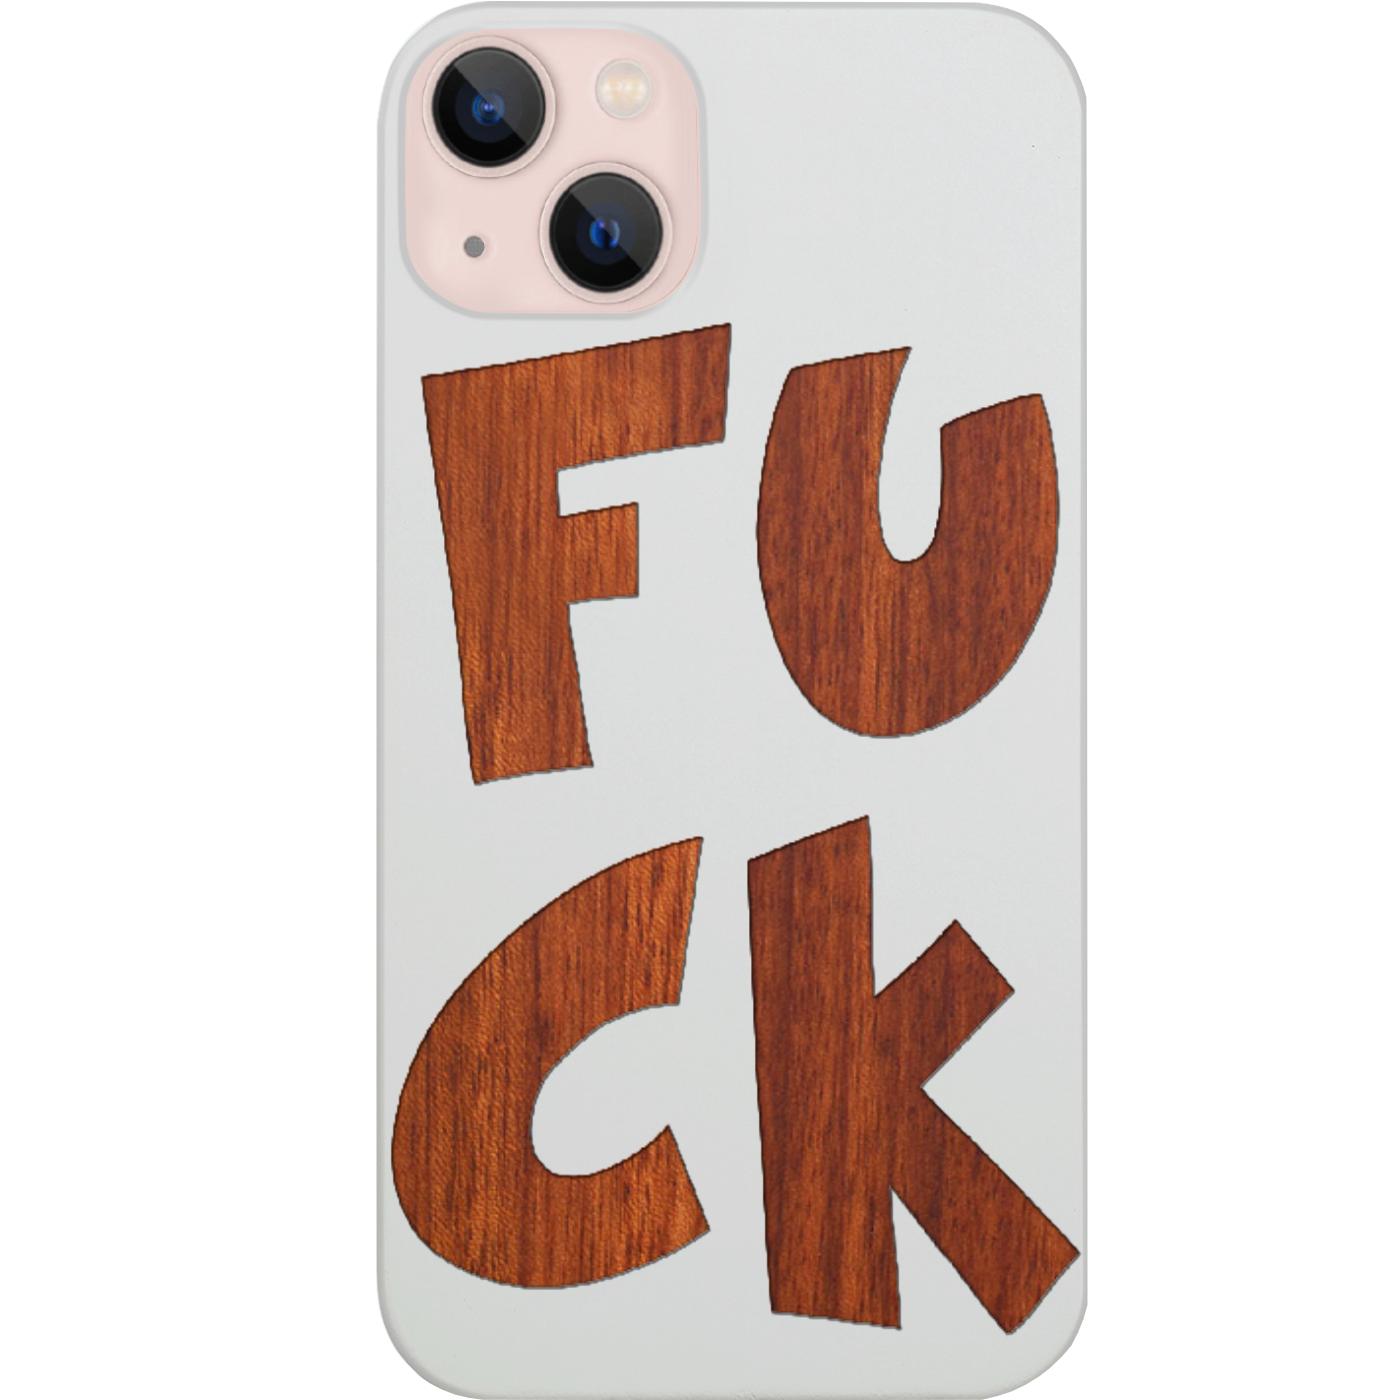 Fuck - Engraved Phone Case